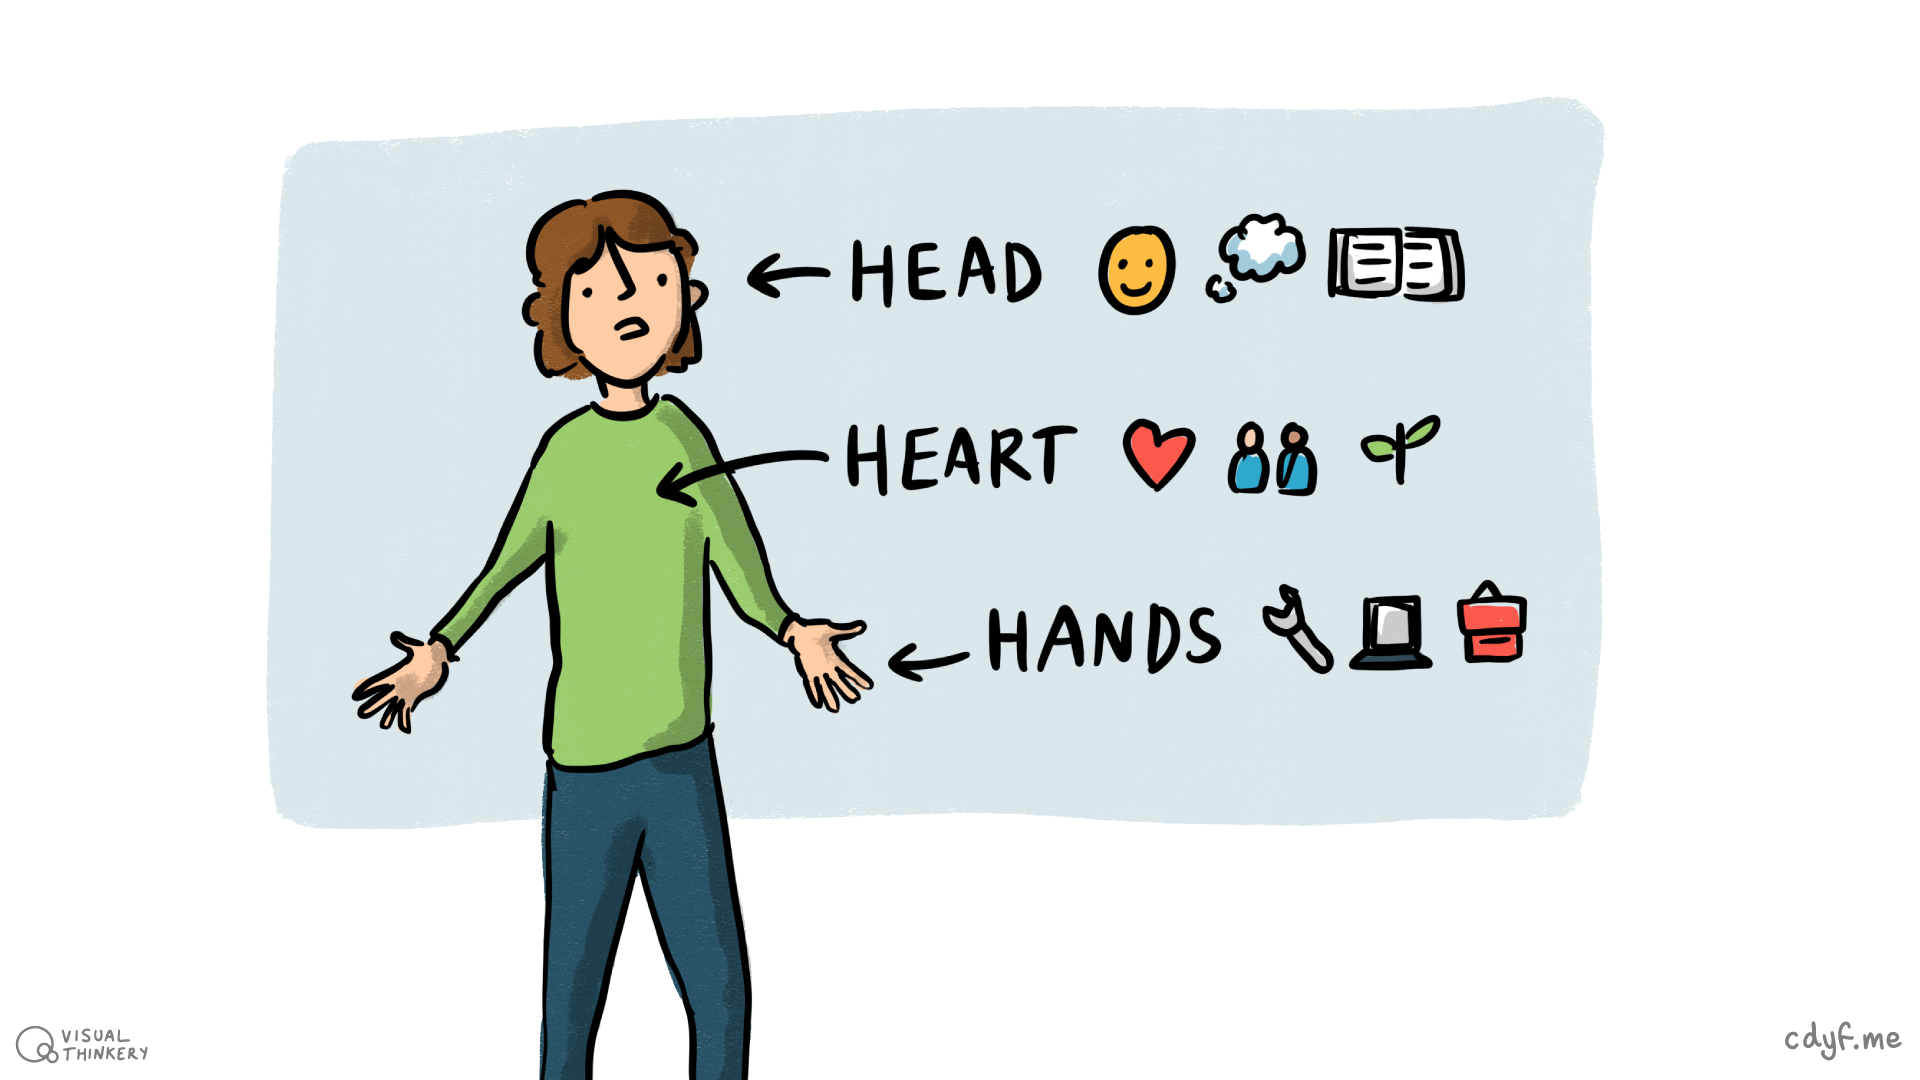 What knowledge do you have (head)? What are your values (heart)? What skills and experience do you have (hands)? Head, heart, hands sketch by Visual Thinkery is licensed under CC-BY-ND